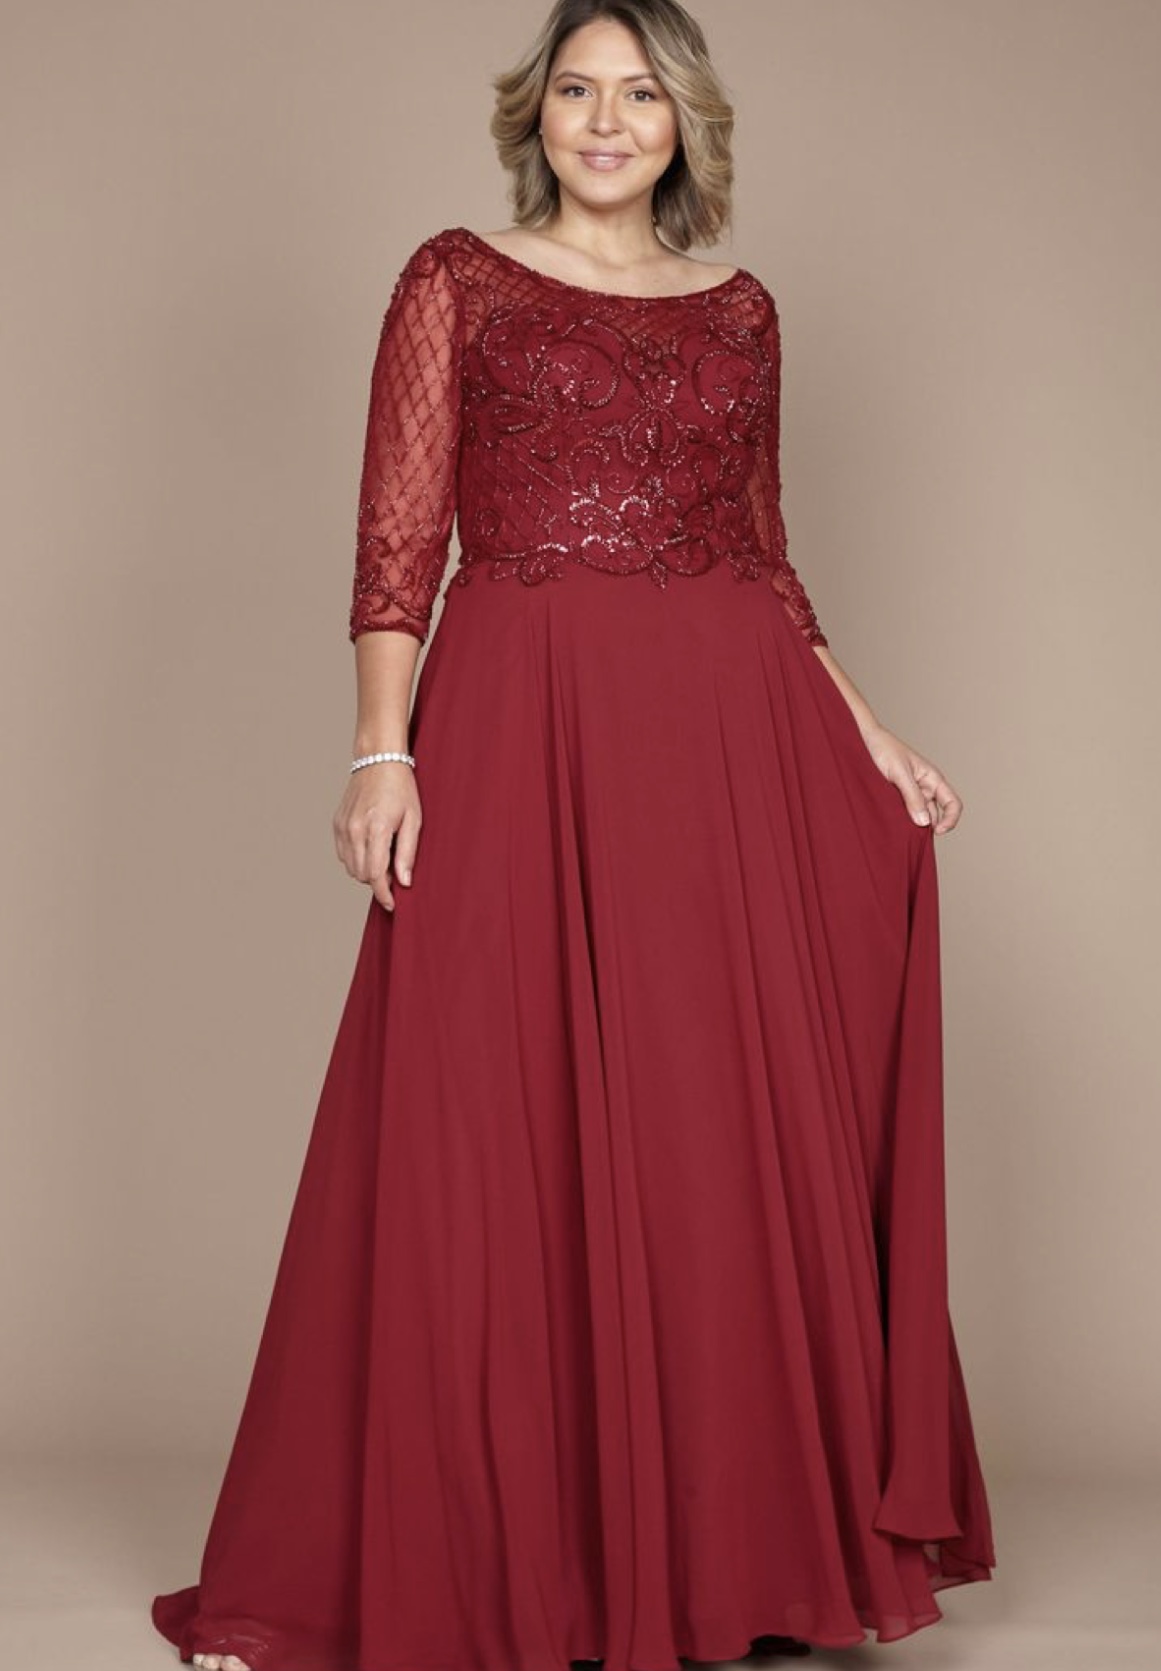 40 Stylish Red Mother of the Bride & Groom Dresses Plus Size